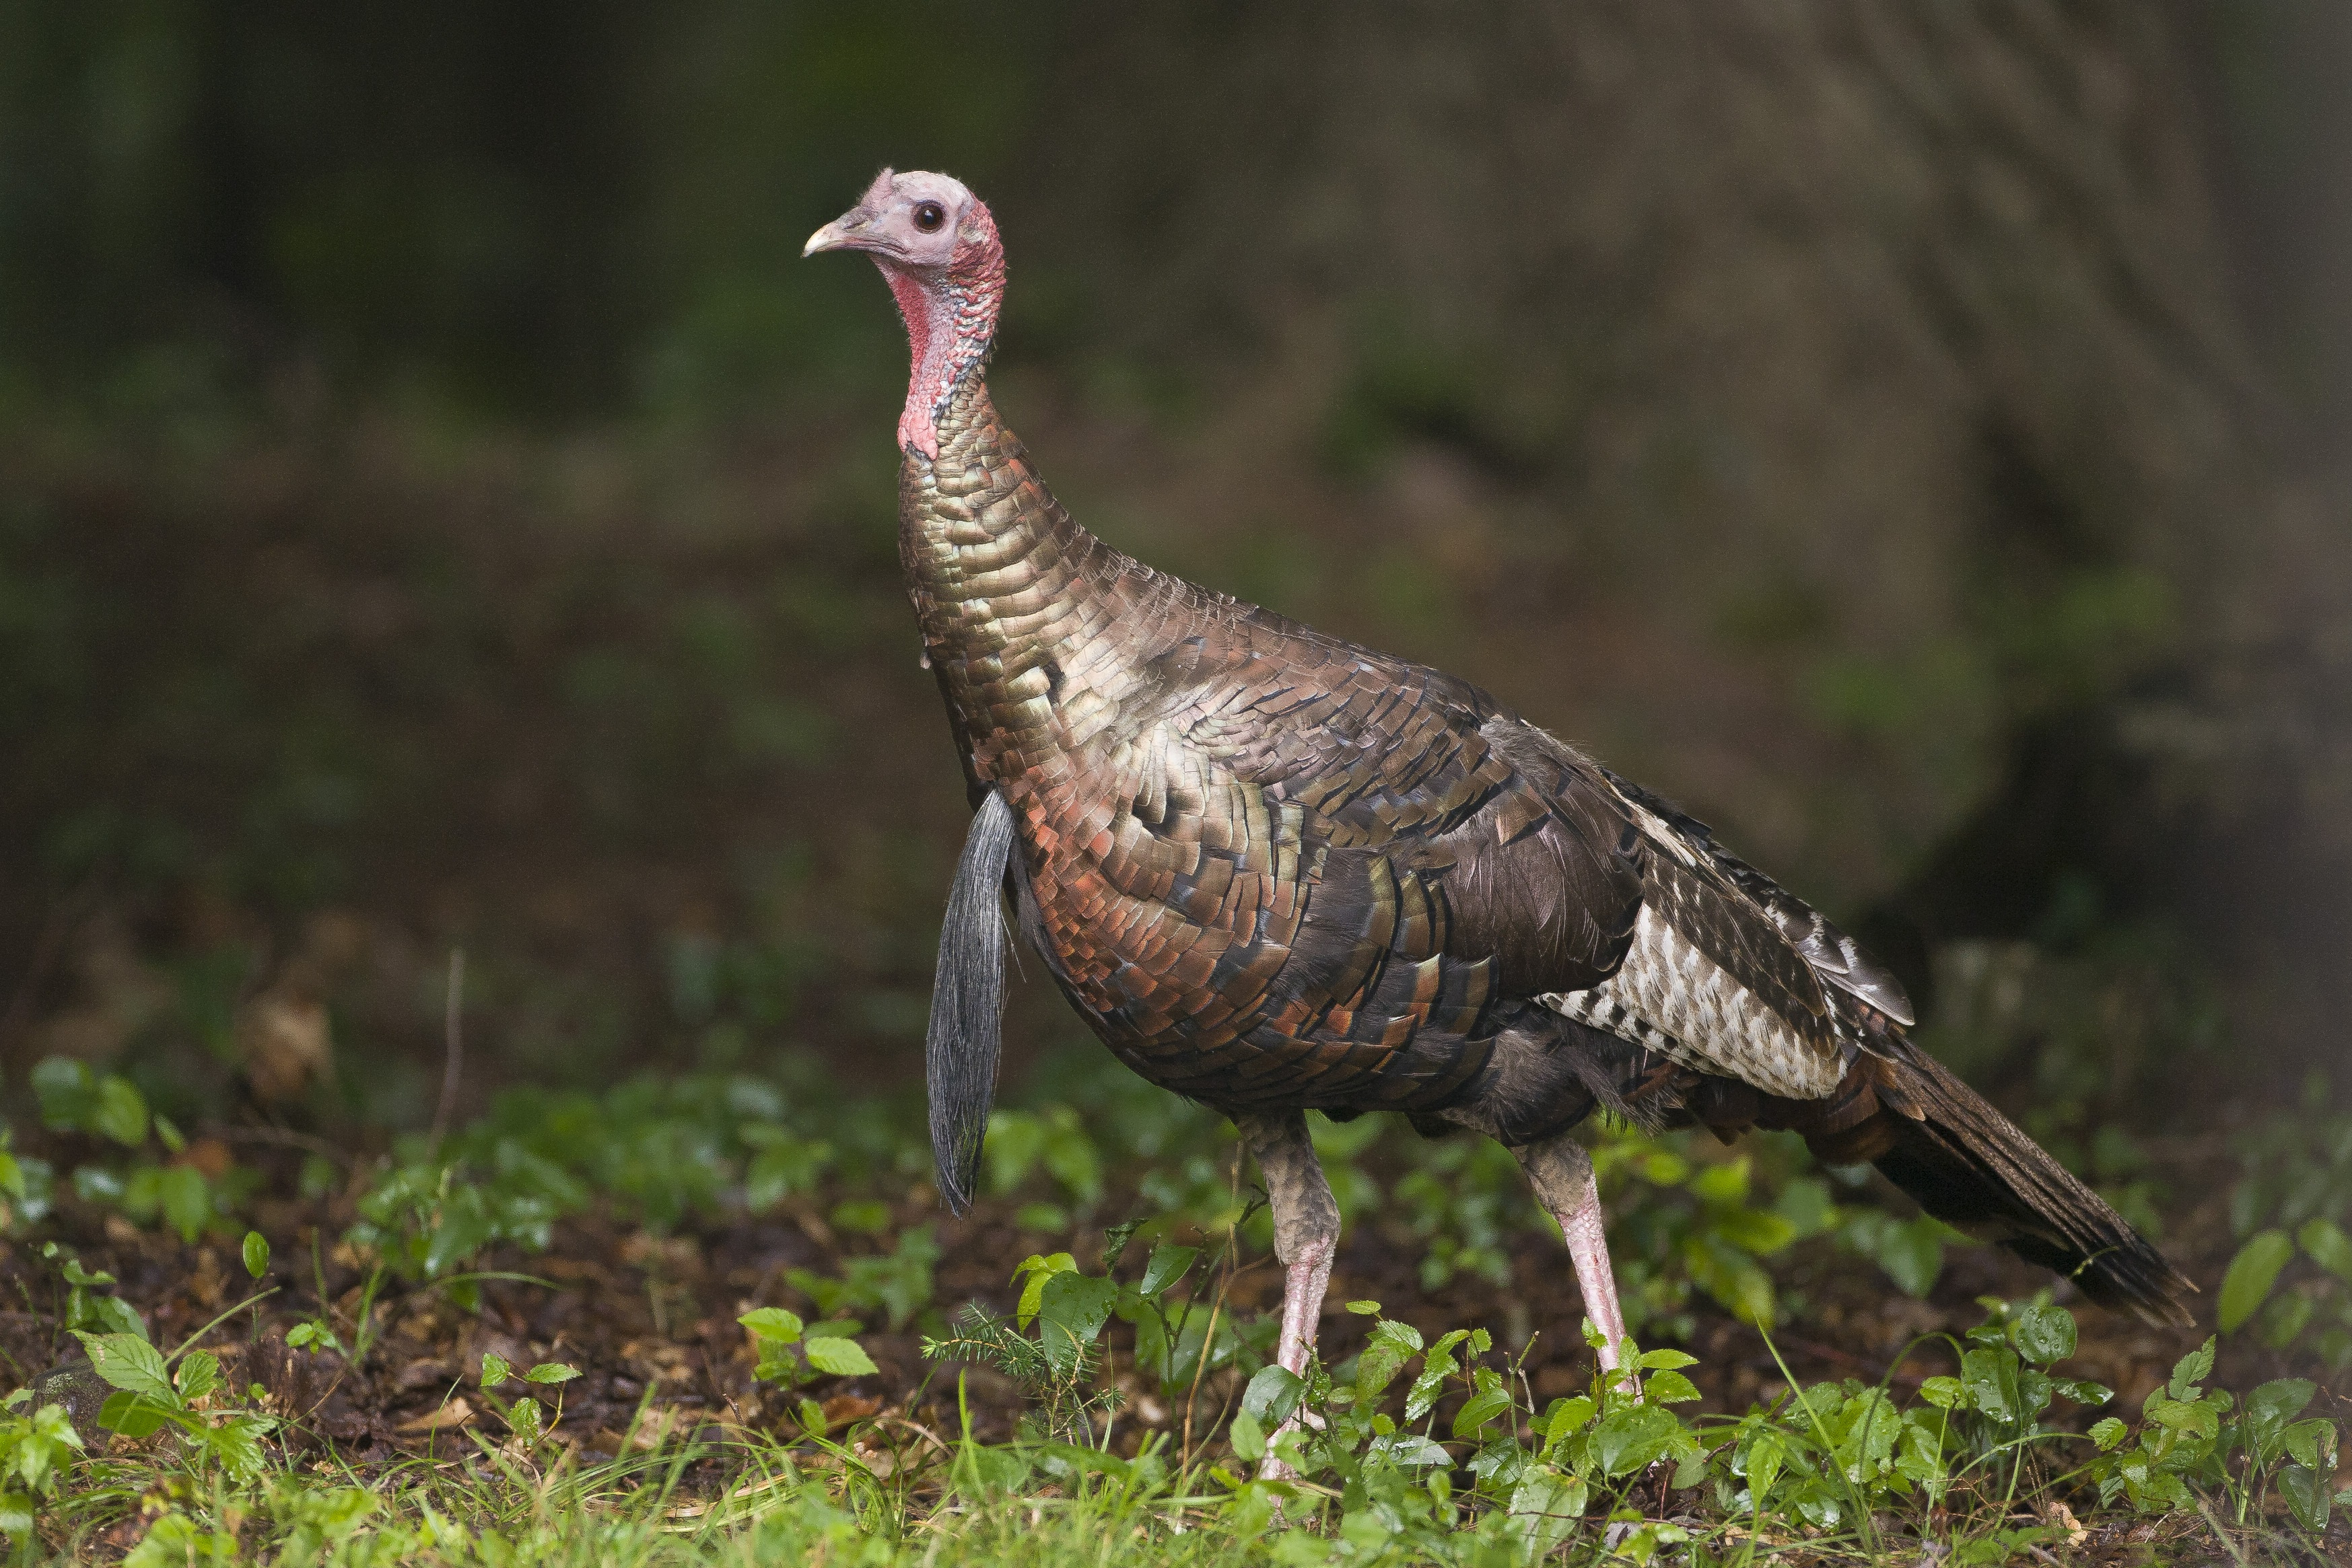 A male turkey with a prominent beard.